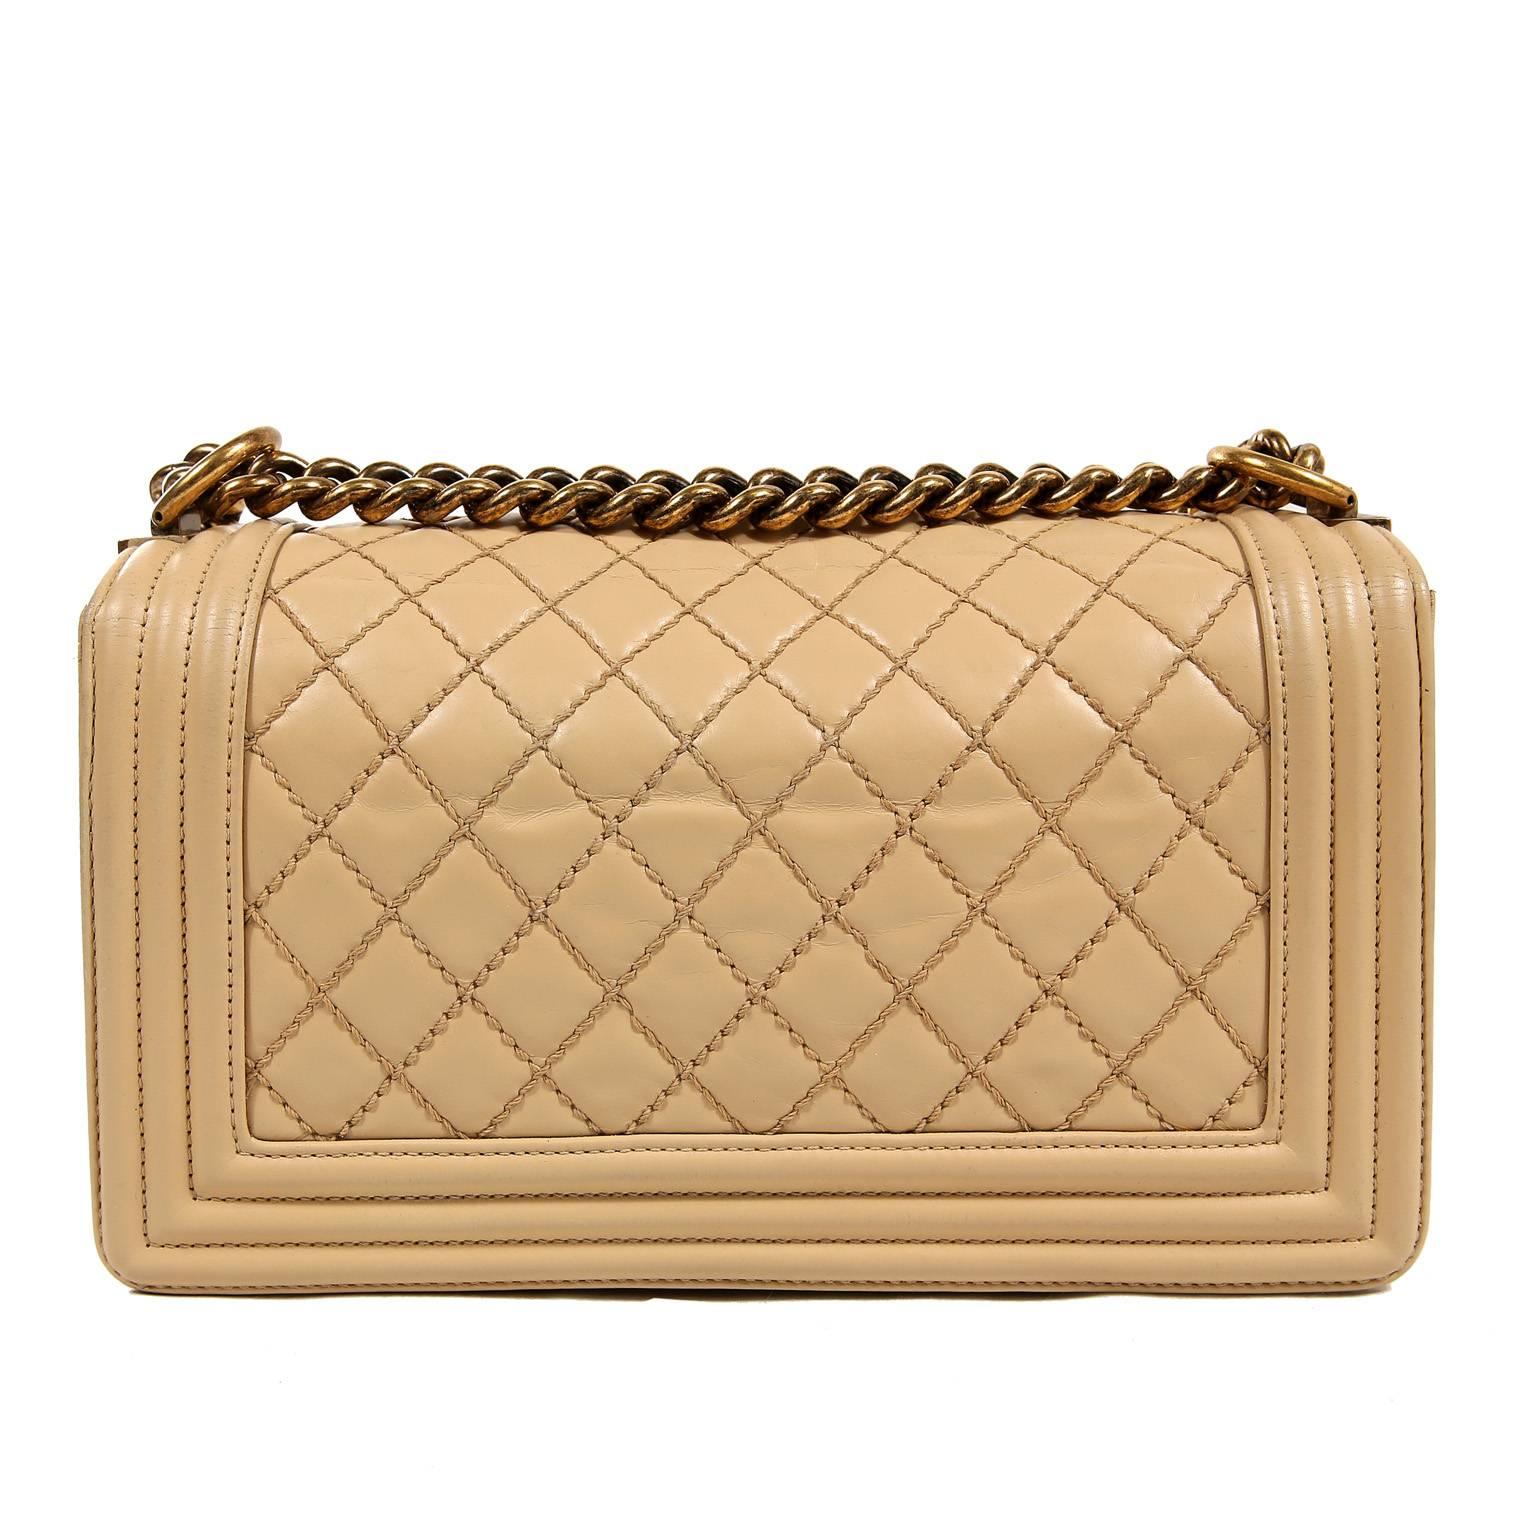 Chanel Beige Leather Medium Boy Bag- Limited Edition; Near Pristine Condition
The updated design is structured and edgy with a versatility that makes it extremely popular.

Warm beige lambskin is quilted in signature Chanel diamond stitched pattern